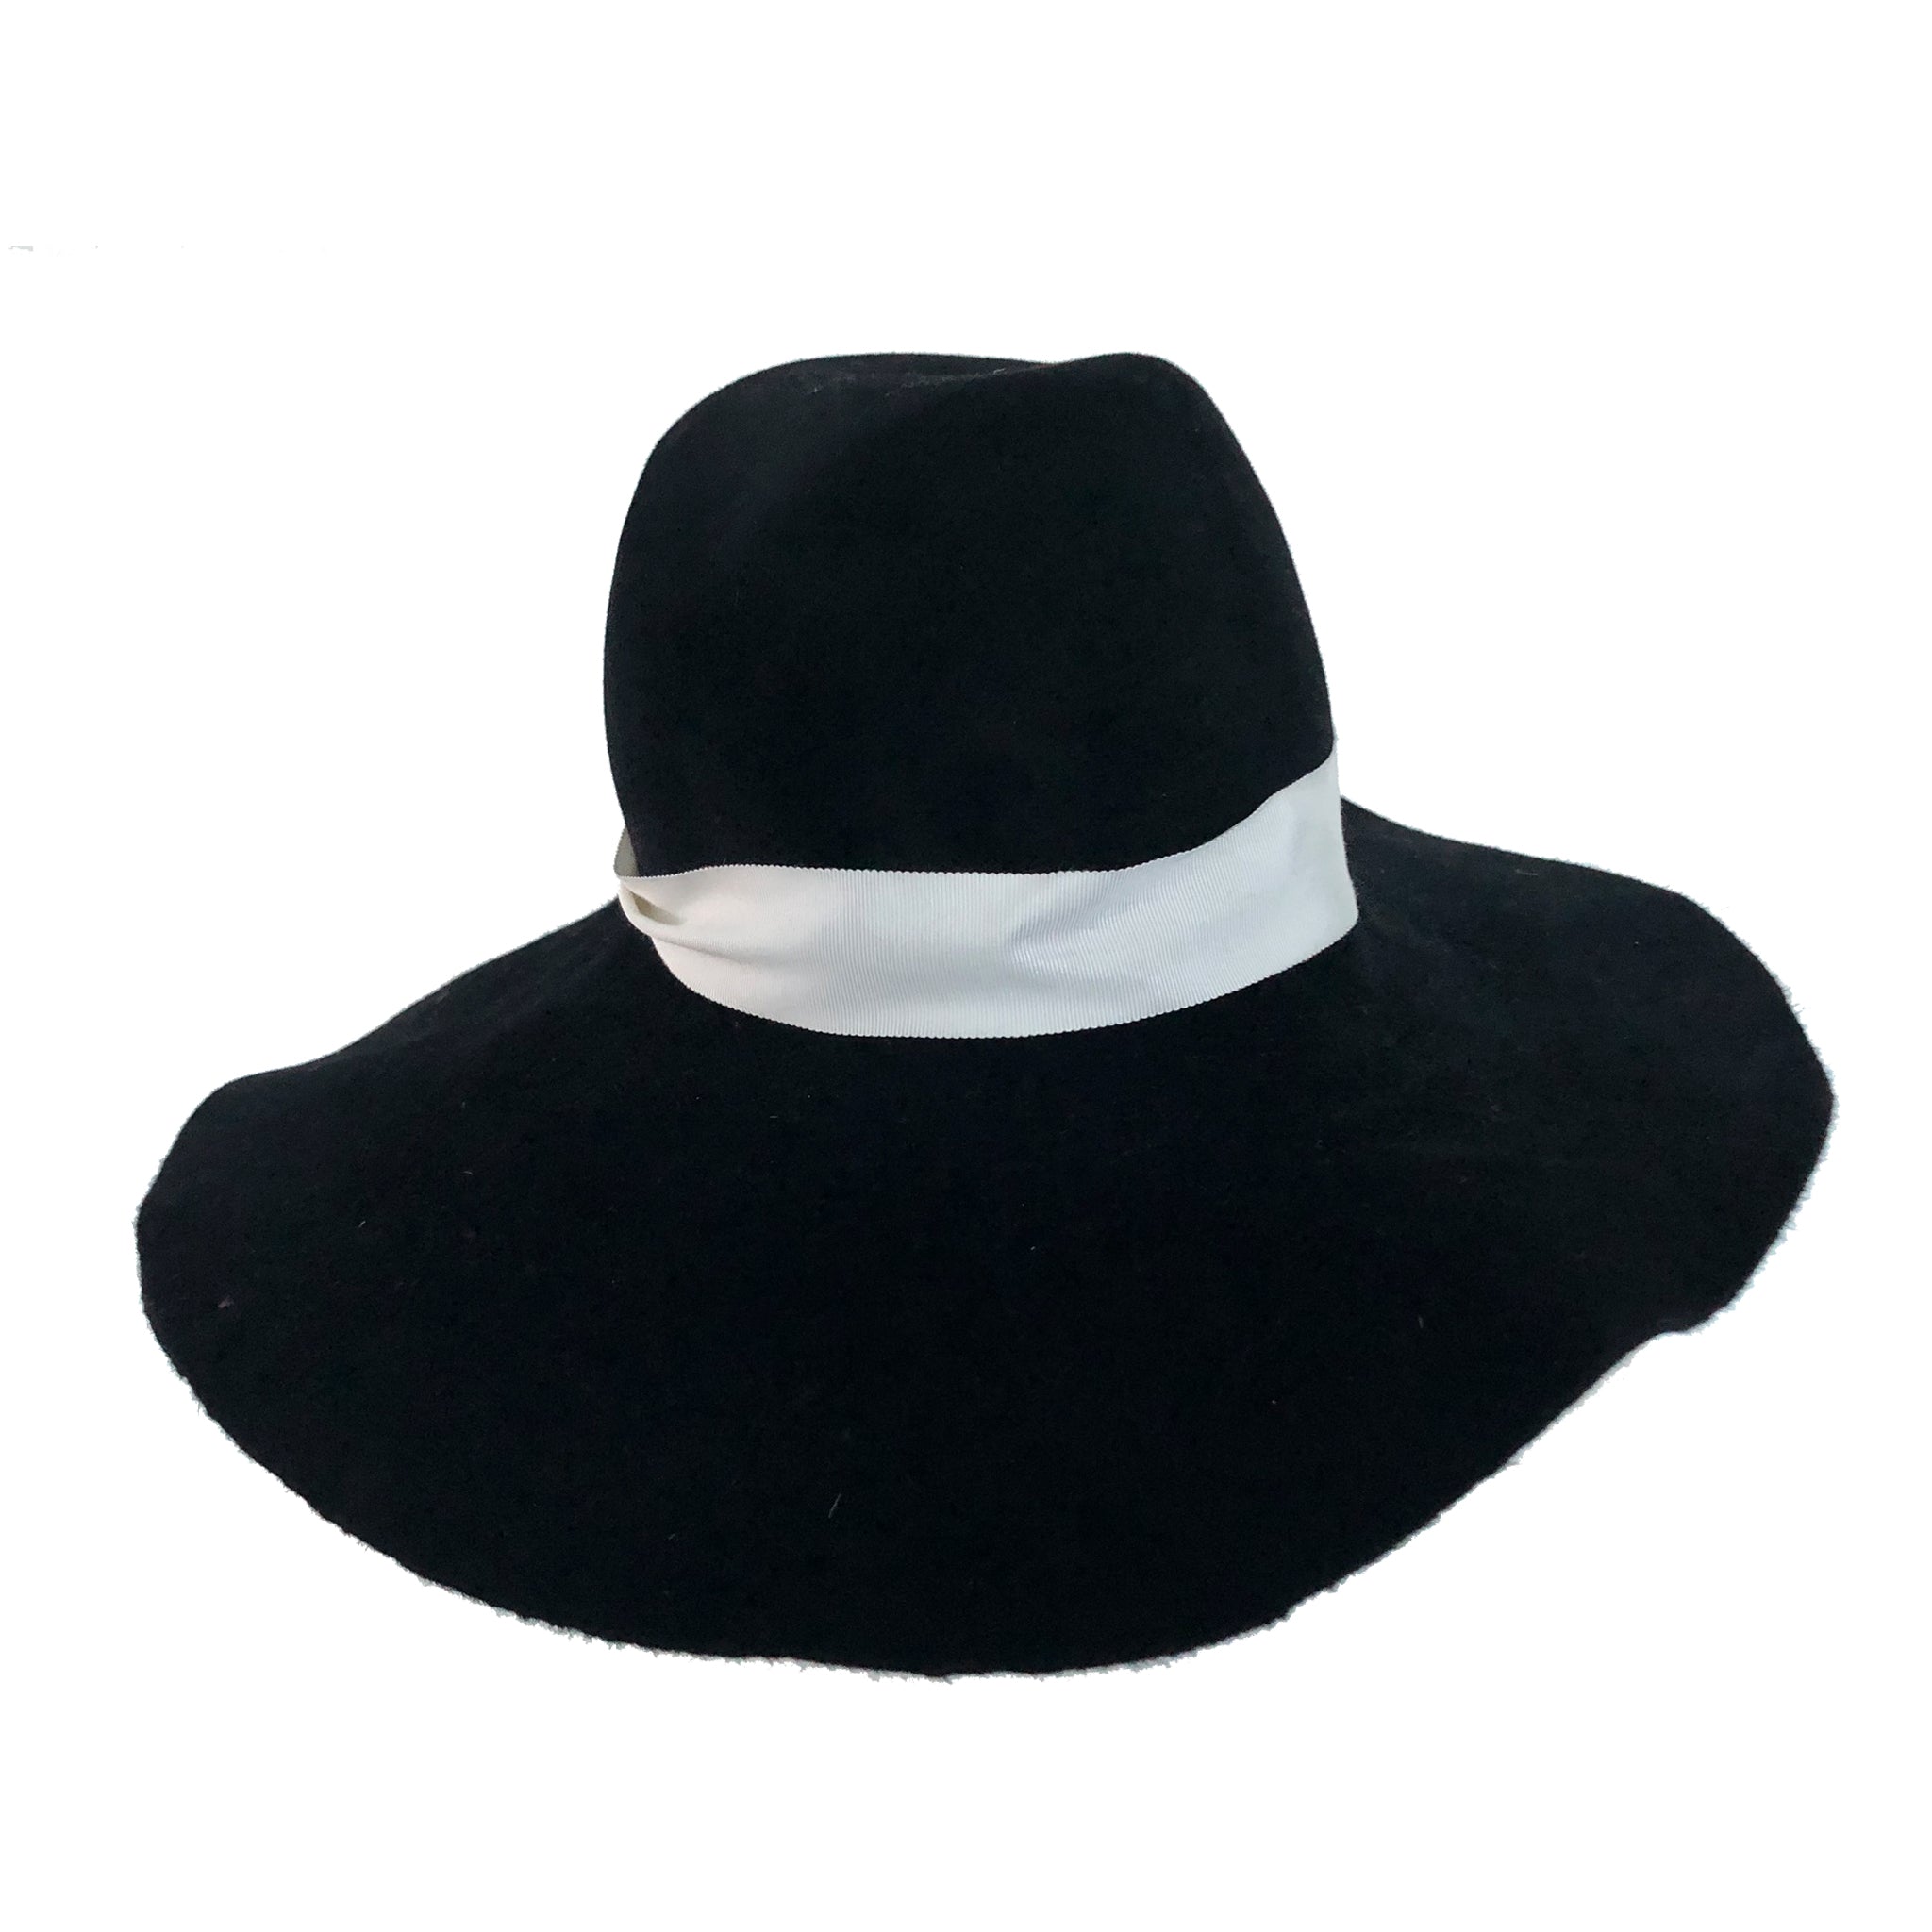  TBGFPO Formal Wide Brim White Black Flower Paper Hat Pearls  Band Felt Floppy Ladies Wedding Church Hat (Color : Black, Size : 1) :  Clothing, Shoes & Jewelry